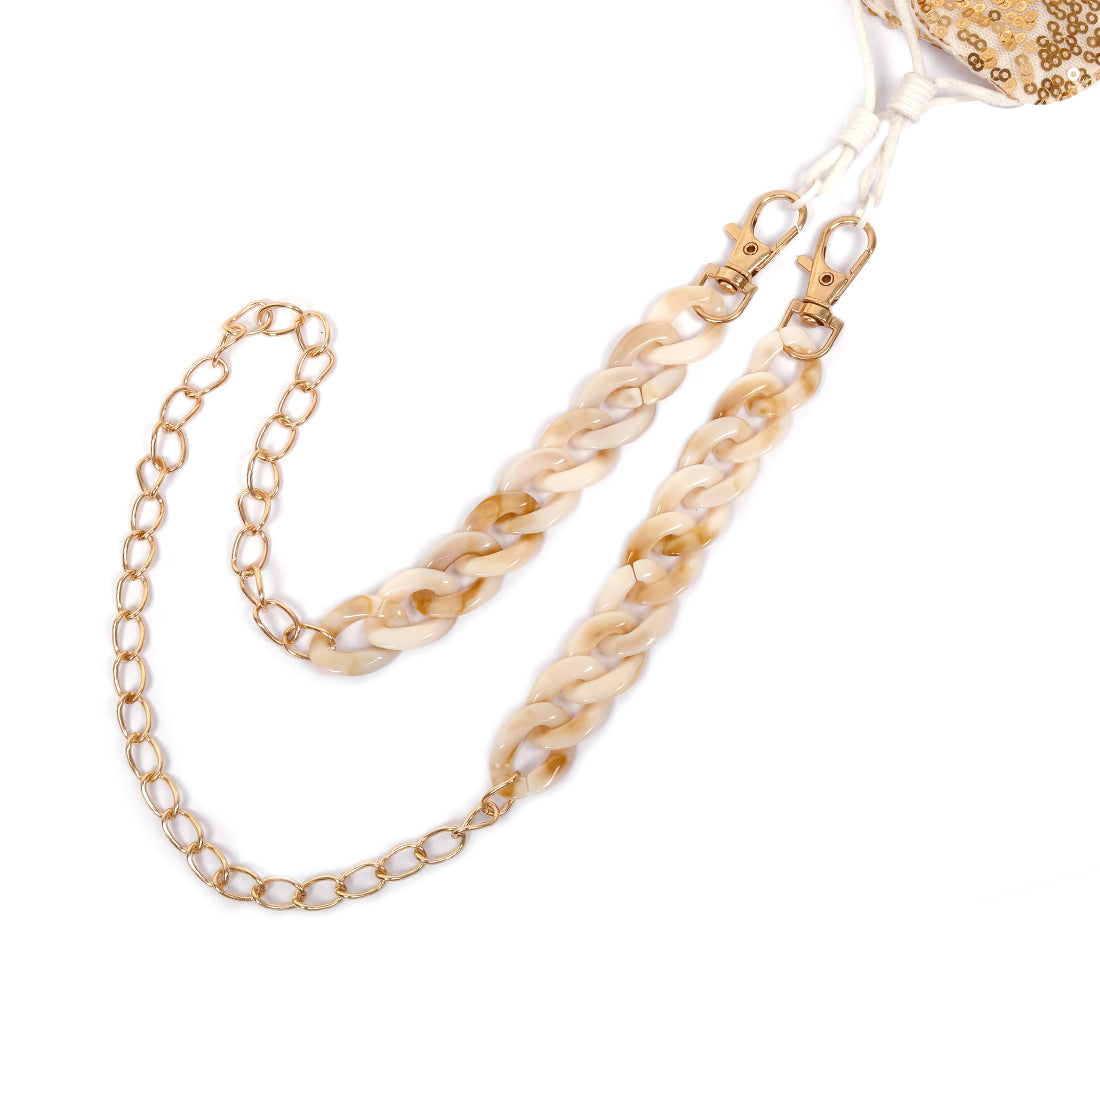 METALLIC GOLD-TONED CHAIN-LINK MARBLE BEIGE ACRYLIC MASK CHAIN OR SUNGLASS CHAIN